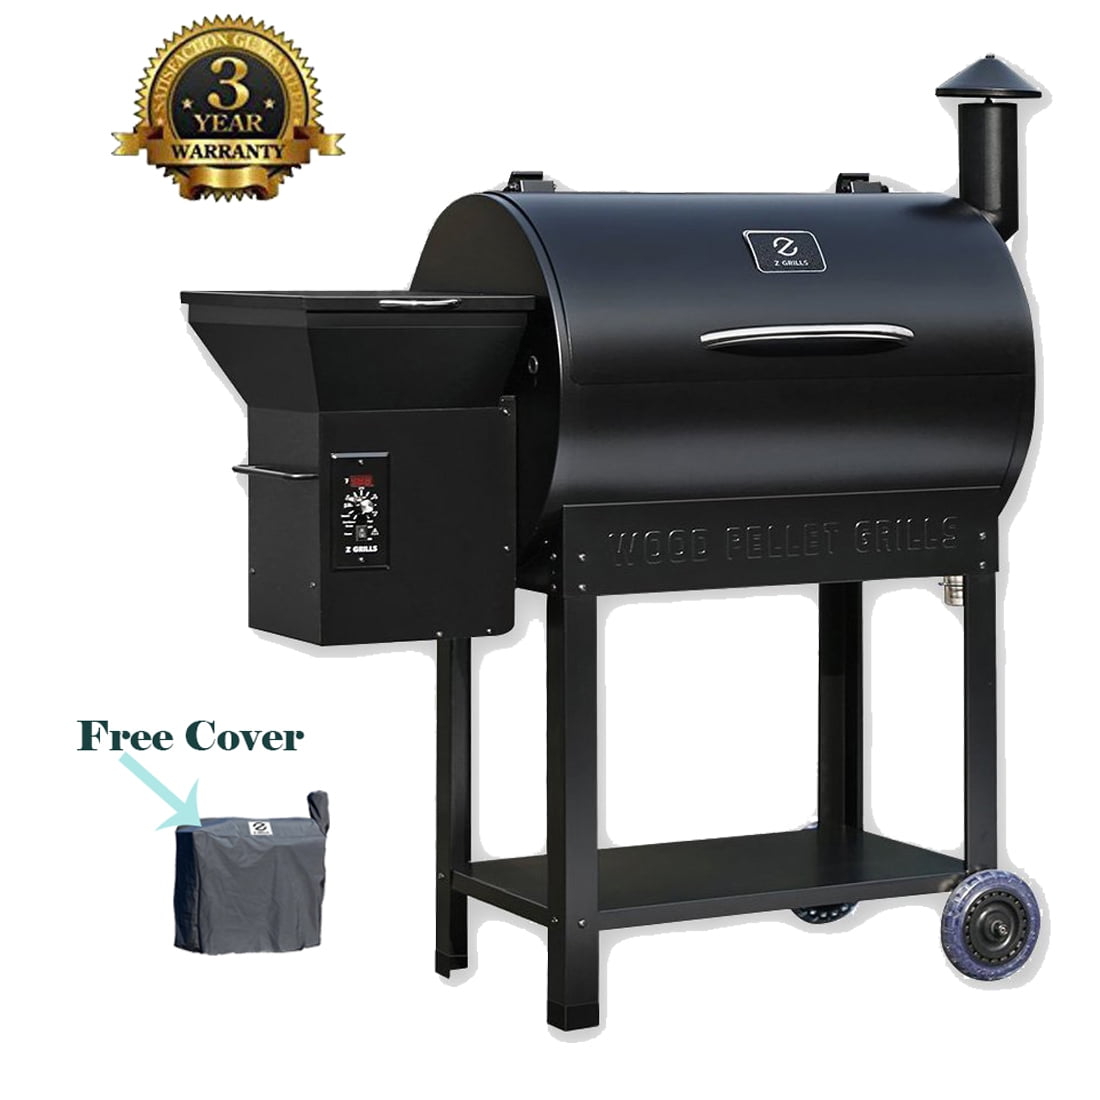 Z GRILLS 7002B Smart Wood Pellet Grill 8 in 1 Outdoor BBQ Smoker 700 SQ  Inches Cooking Area Barbecue Grill Black